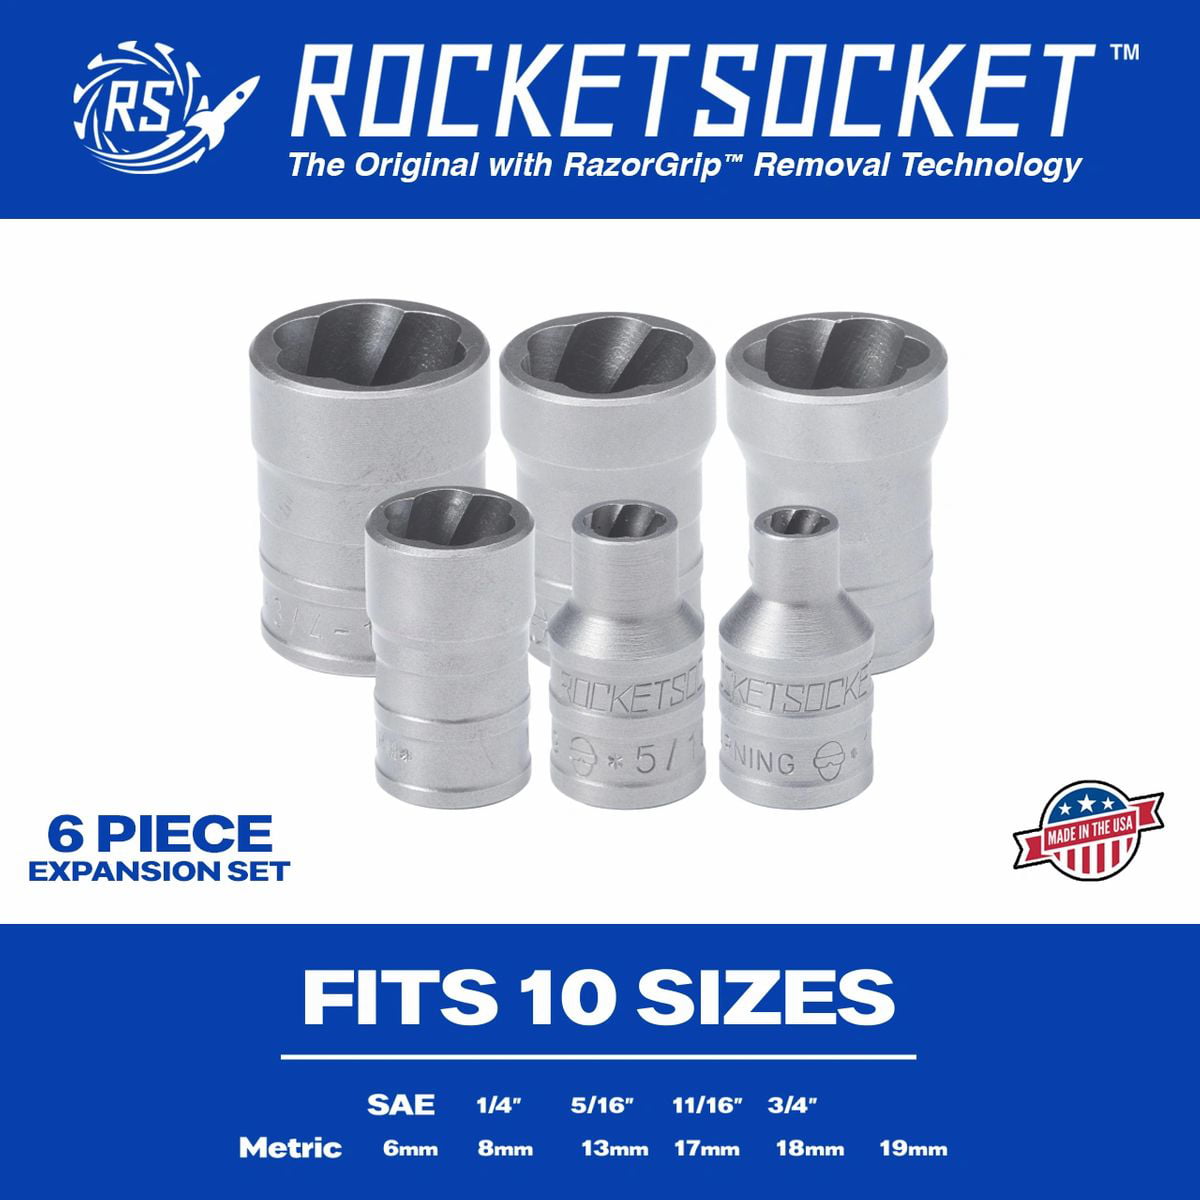 Details about   ROCKETSOCKET Damaged Frozen Rusted Bolt Nut & Screw Extractor 13pc Set3/8" Drive 